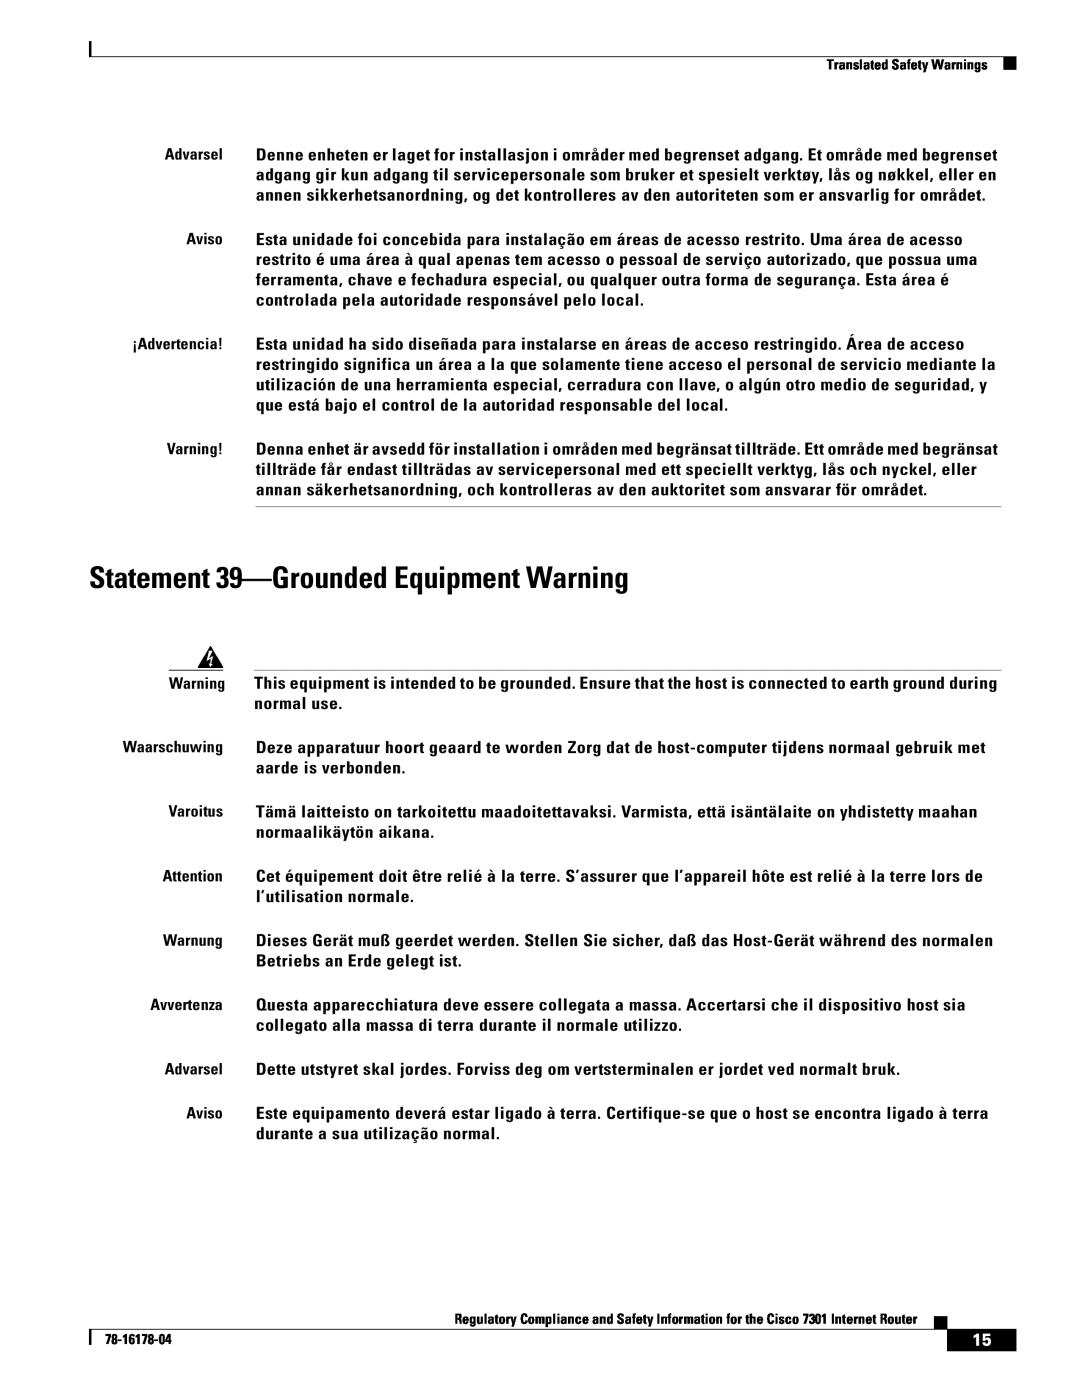 Cisco Systems CISCO7301 manual Statement 39-Grounded Equipment Warning 